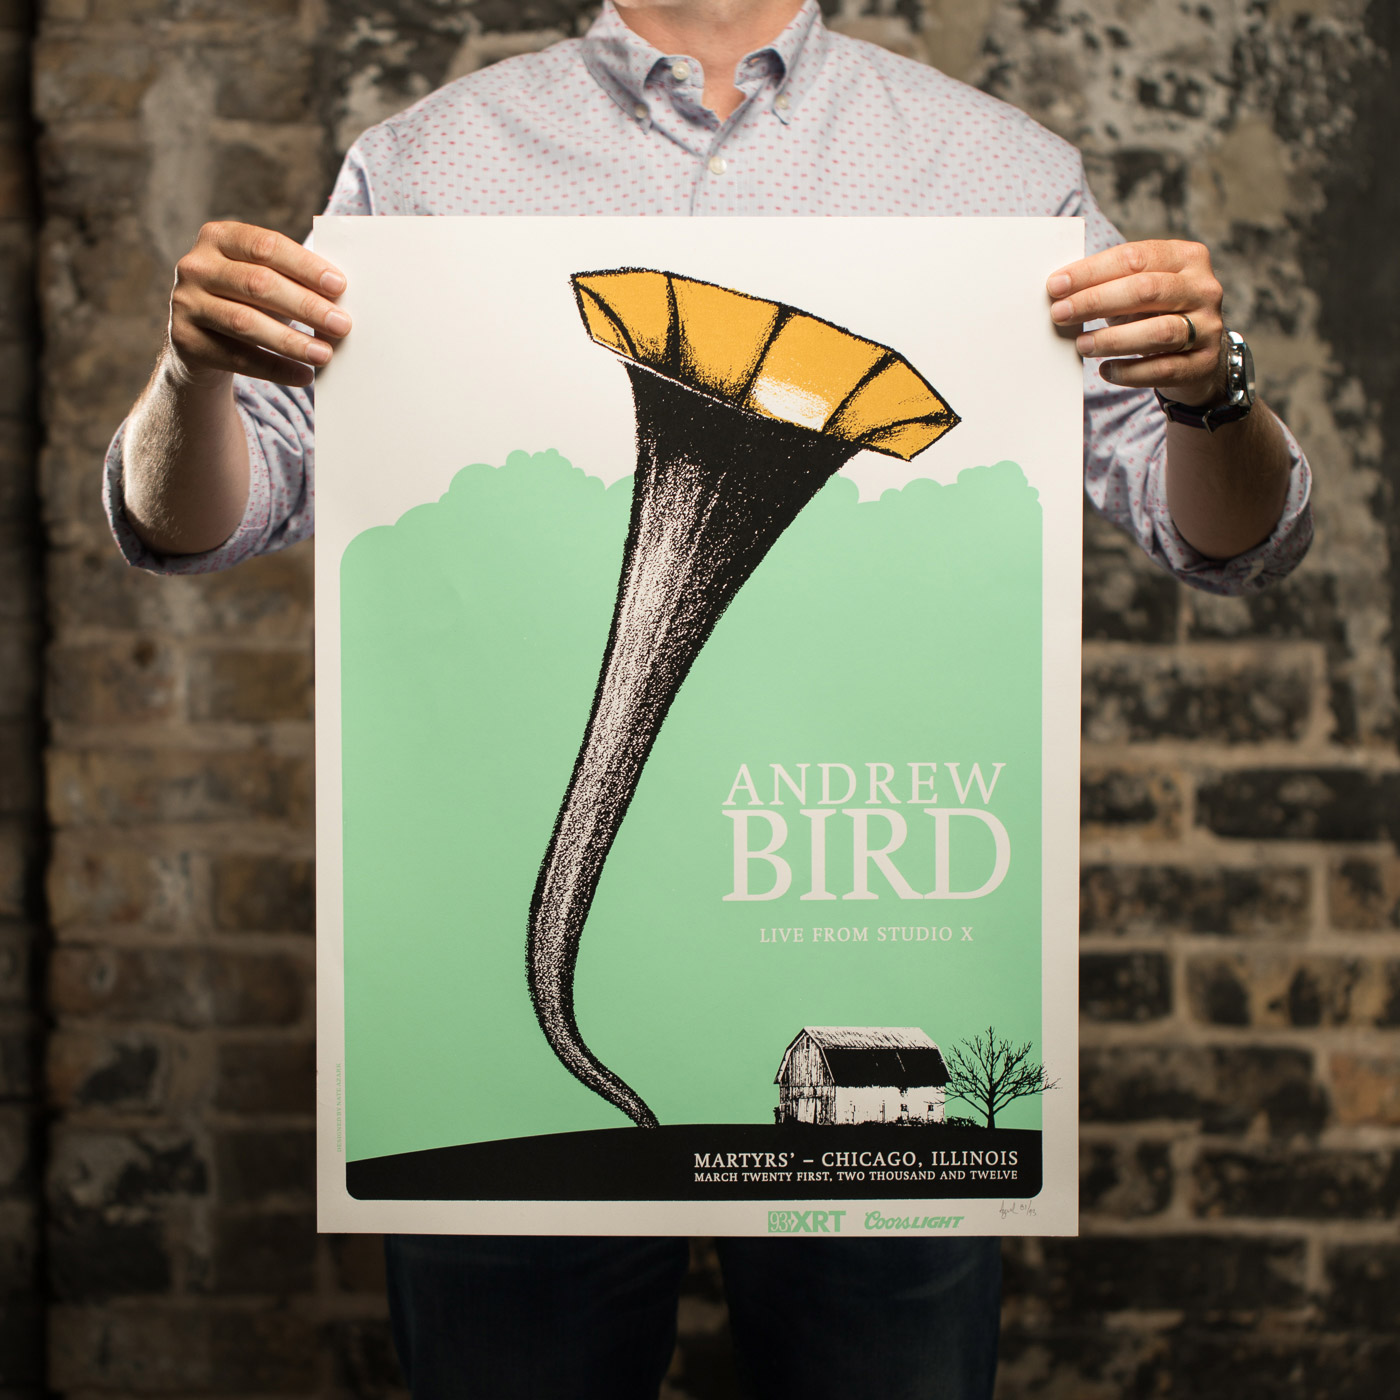 Andrew Bird Martyrs' Chicago Illinois concert poster.